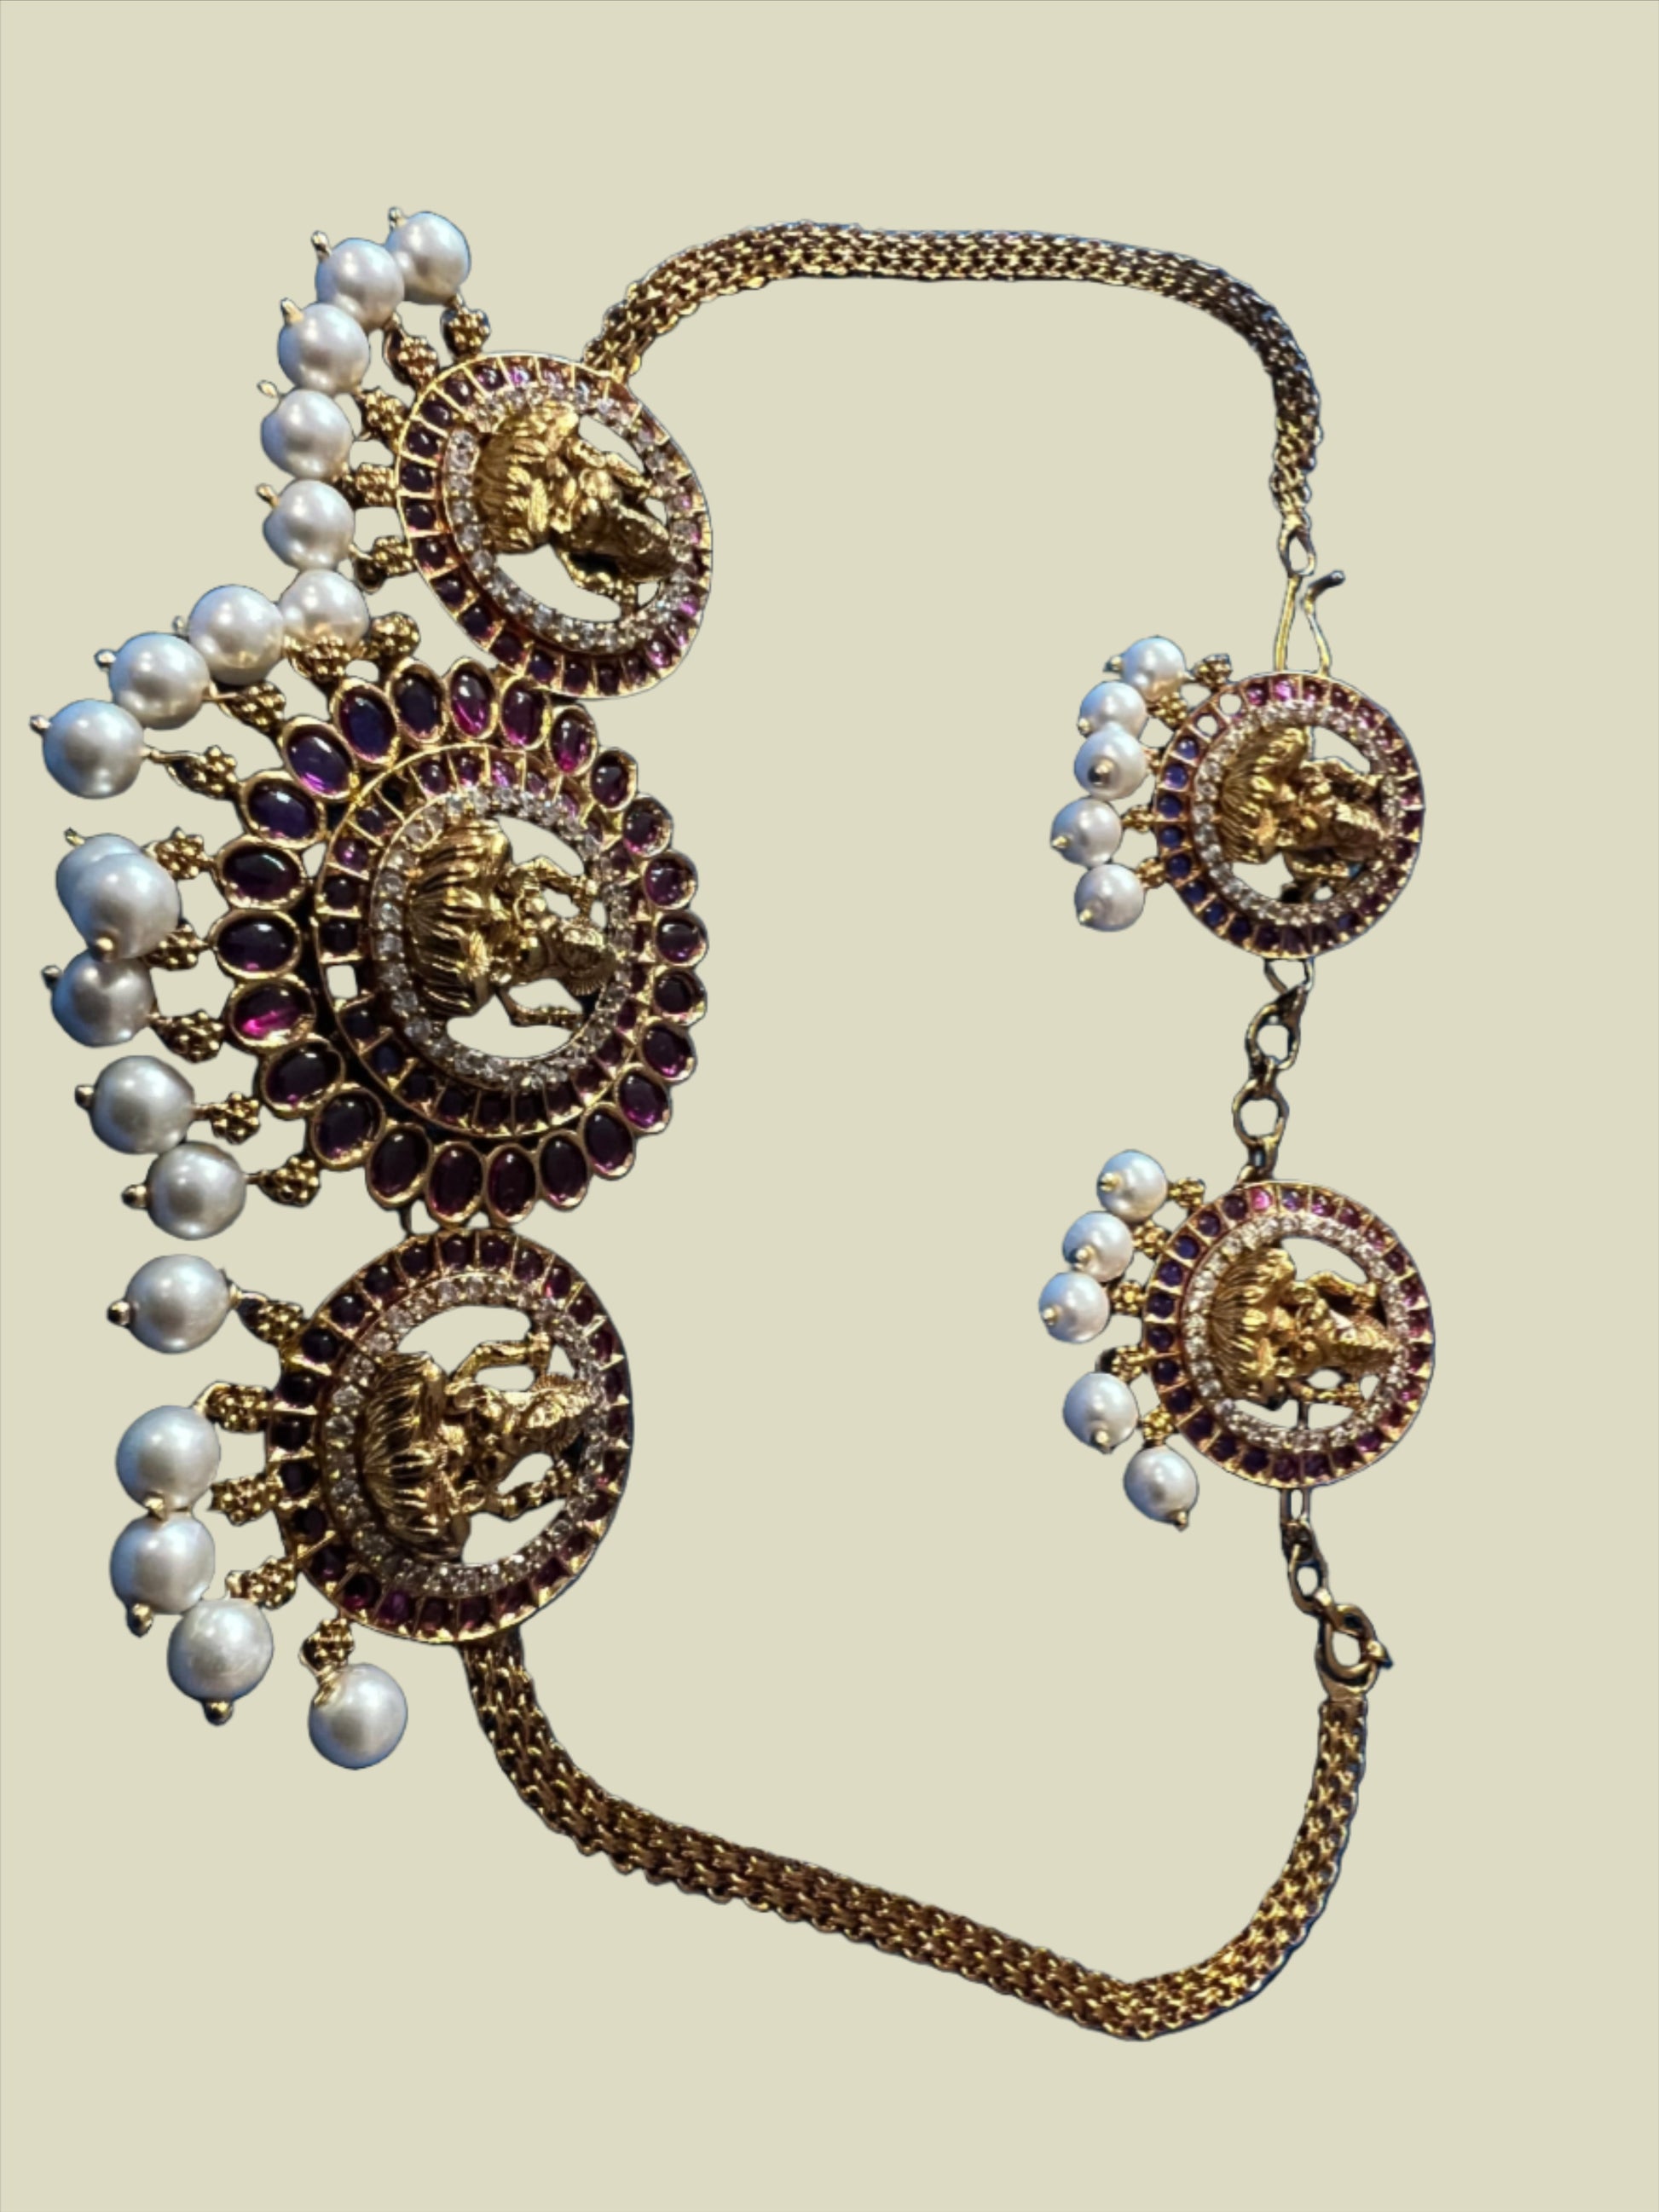 red stone with pearl,Lakshmi necklace or choker and matching earrings